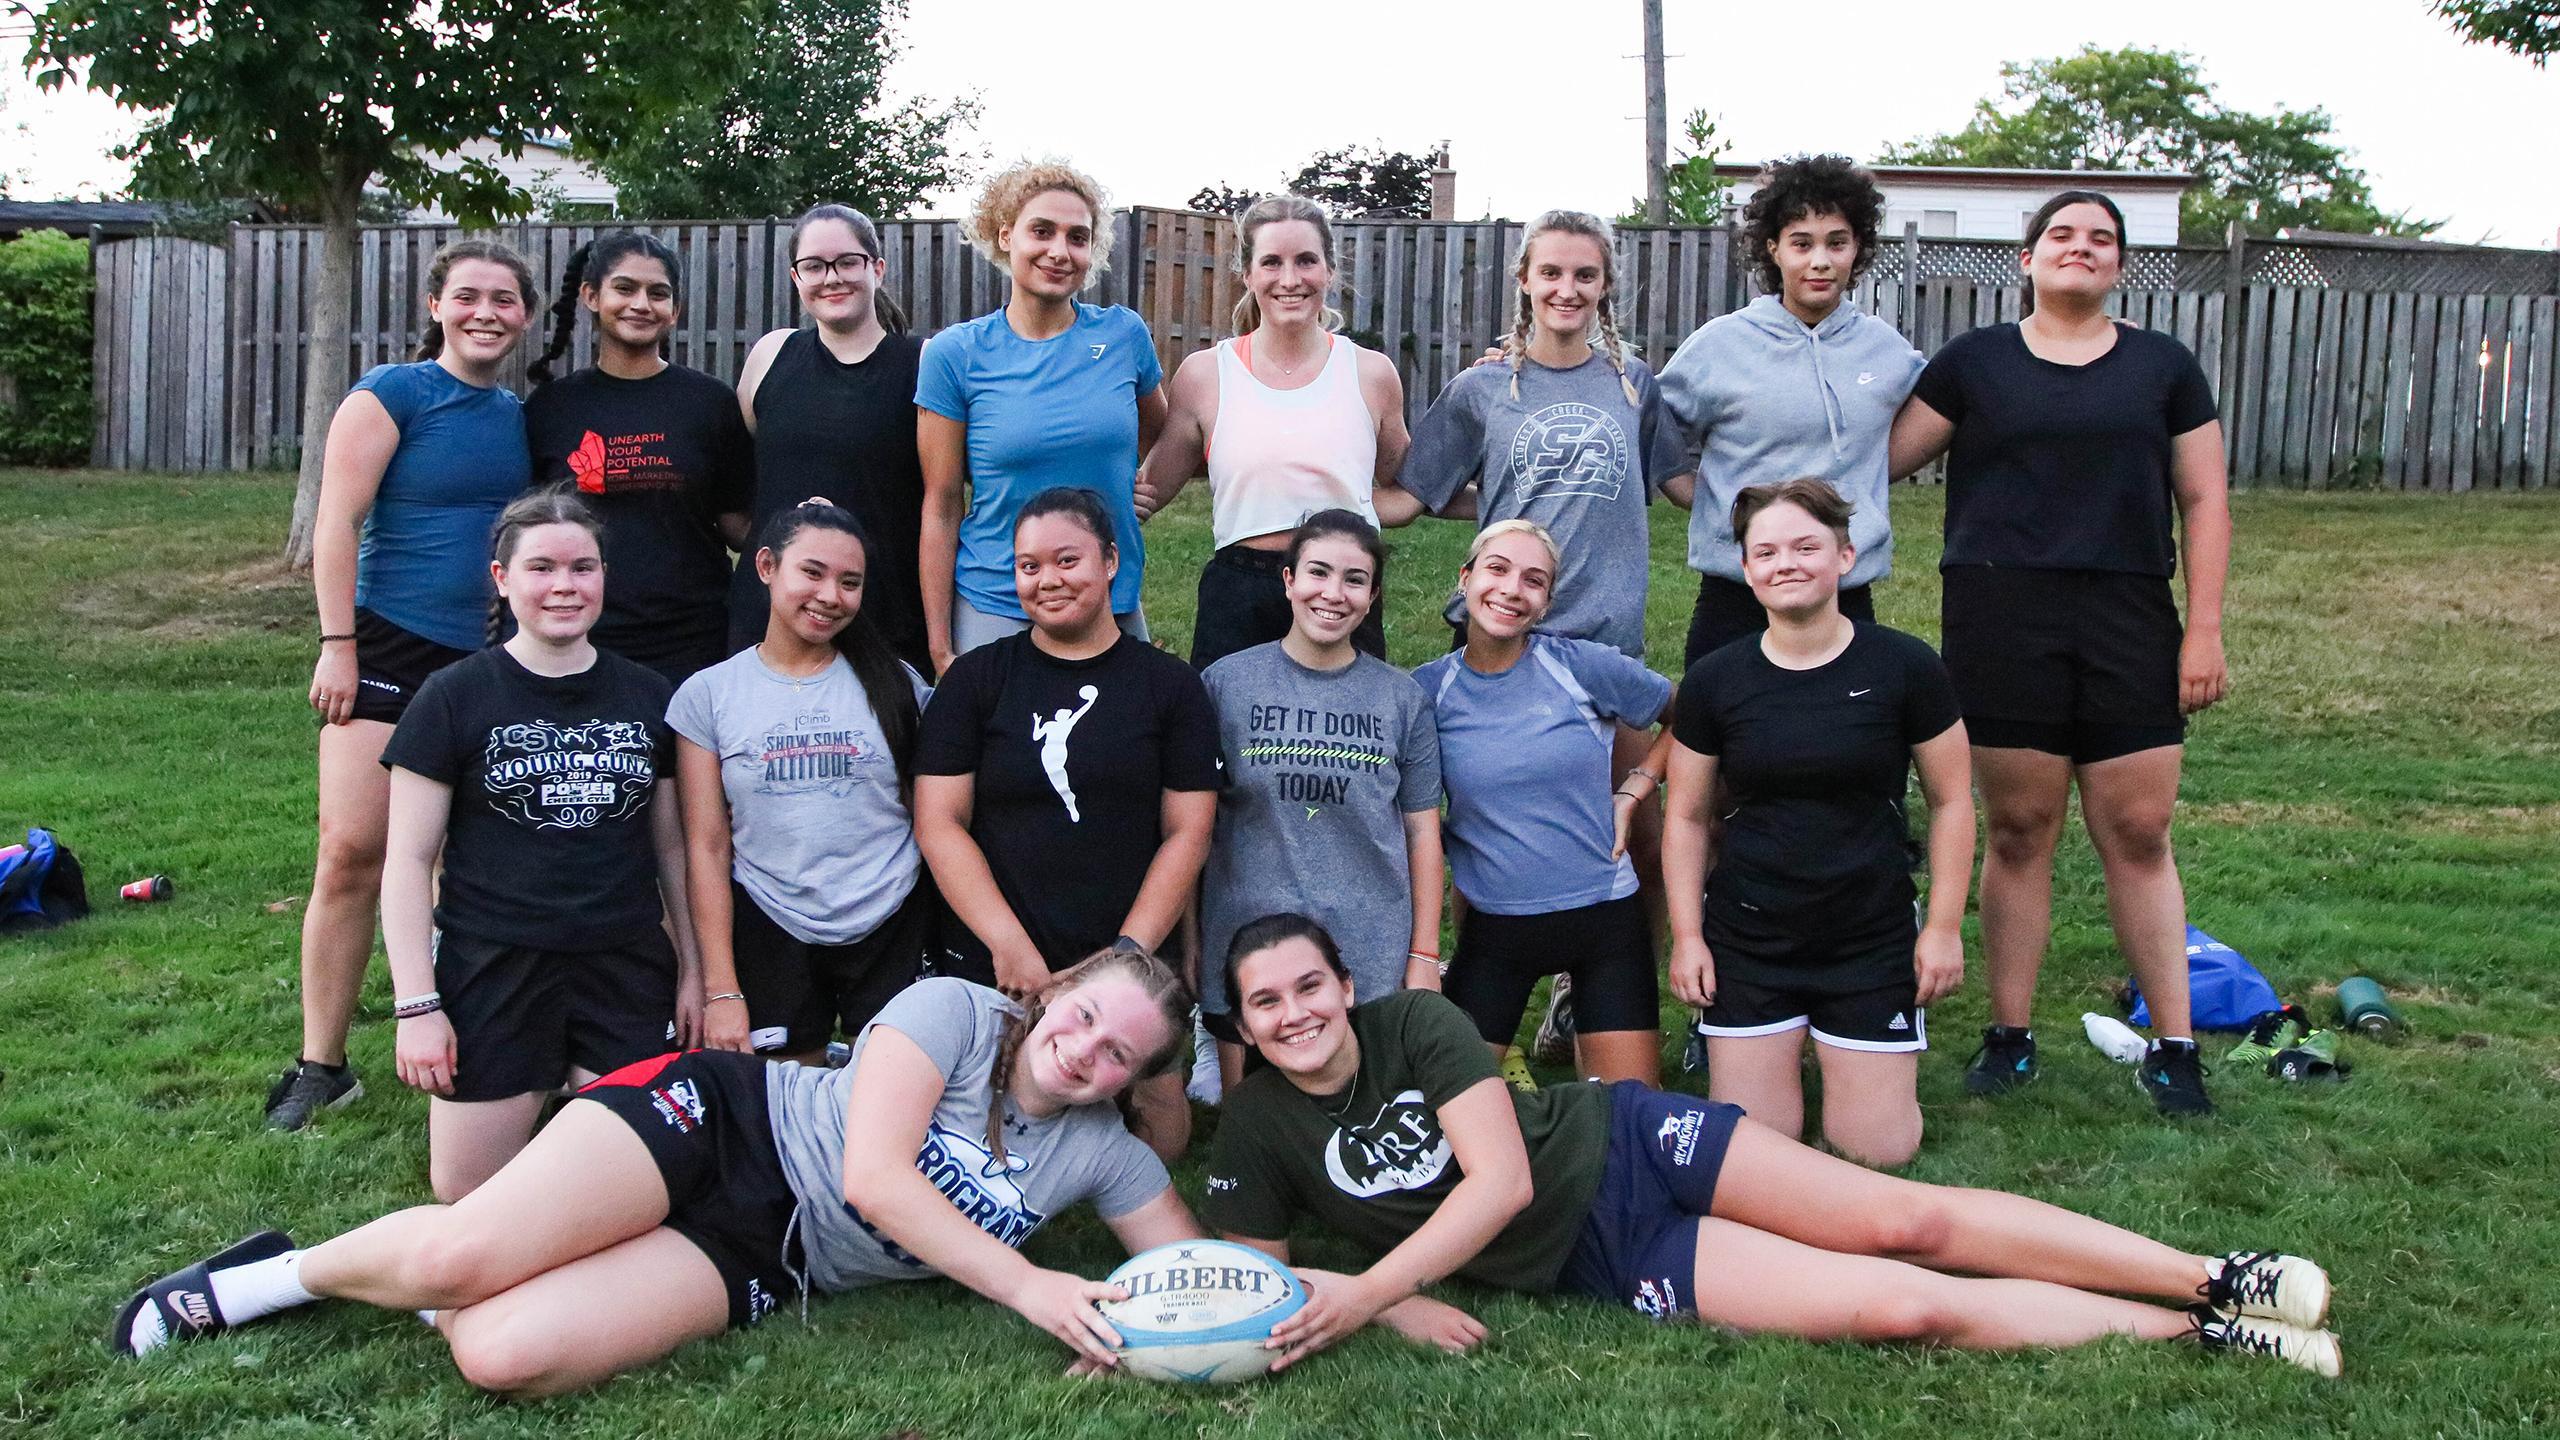 The Ryerson Rams women's rugby team, smiling and posing outside in the grass with a brown fence behind them. The back row of people are standing, the middle row are on their knees, and the front few are lying down, holding a rugby ball with the word "Gilbert" on it. The team consists of women from various ethnic backgrounds, but they're all young and in athletic wear.